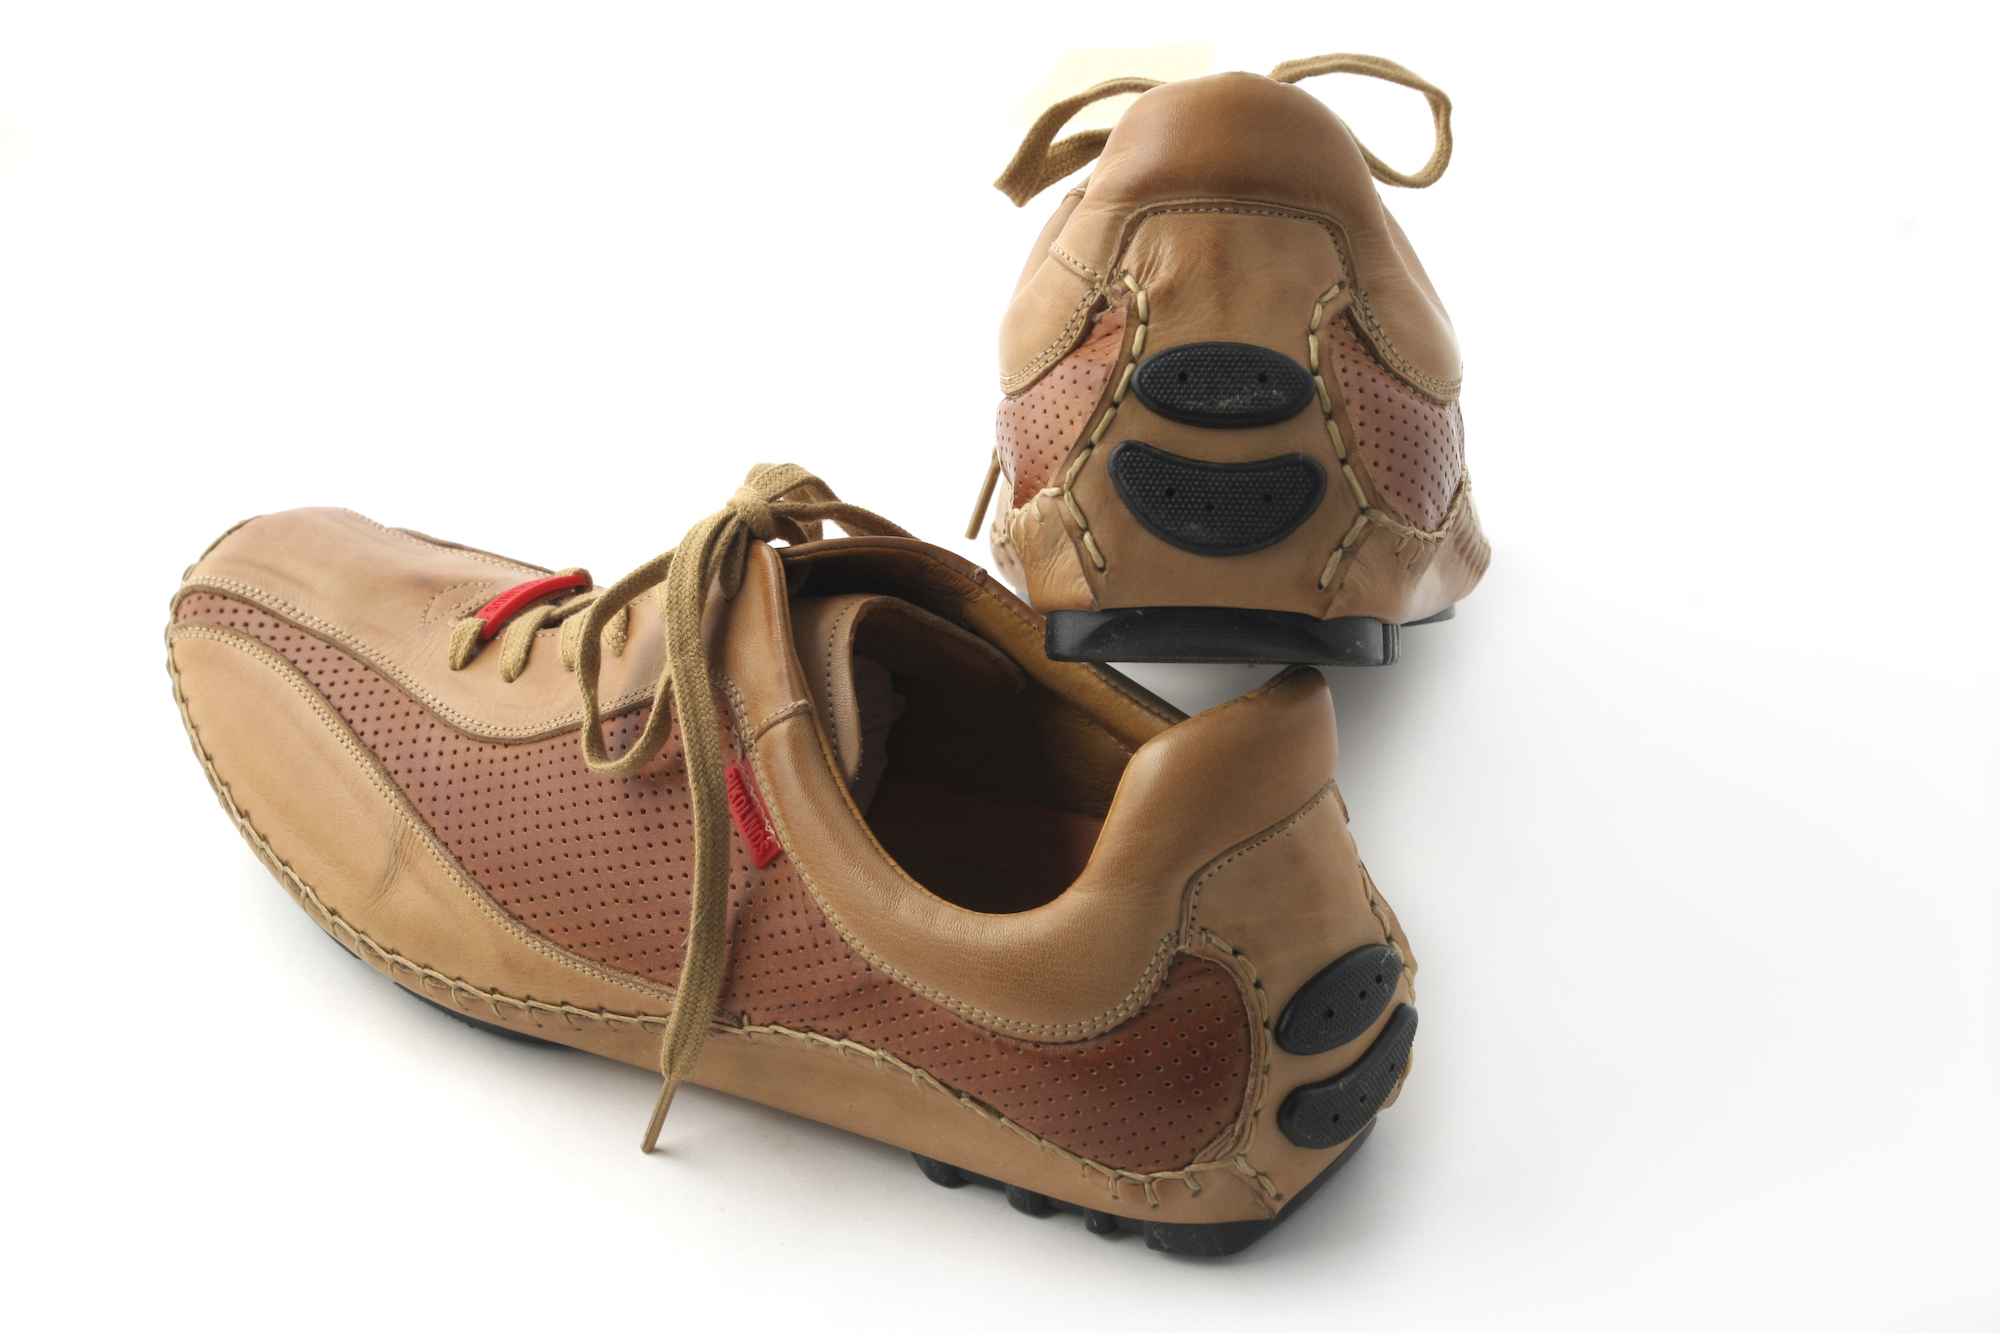 Tan Pikolinos hand-stitched driving shoes